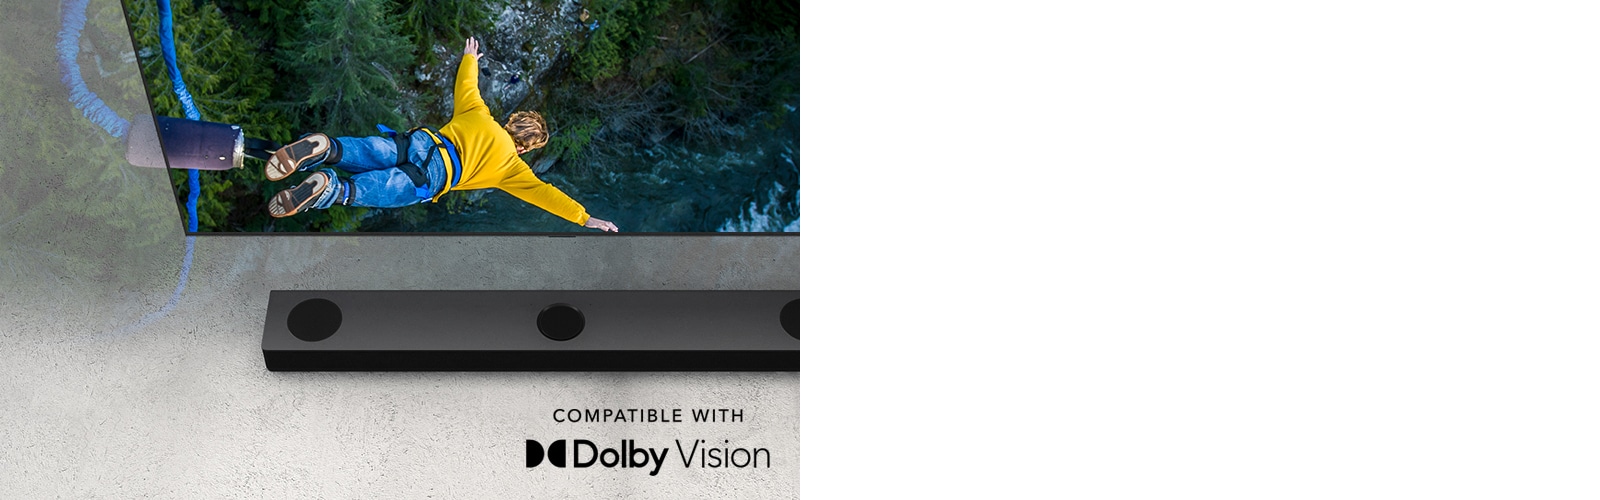 HDMI Passthrough — Dolby Vision, 4K and HDR10, Passthrough